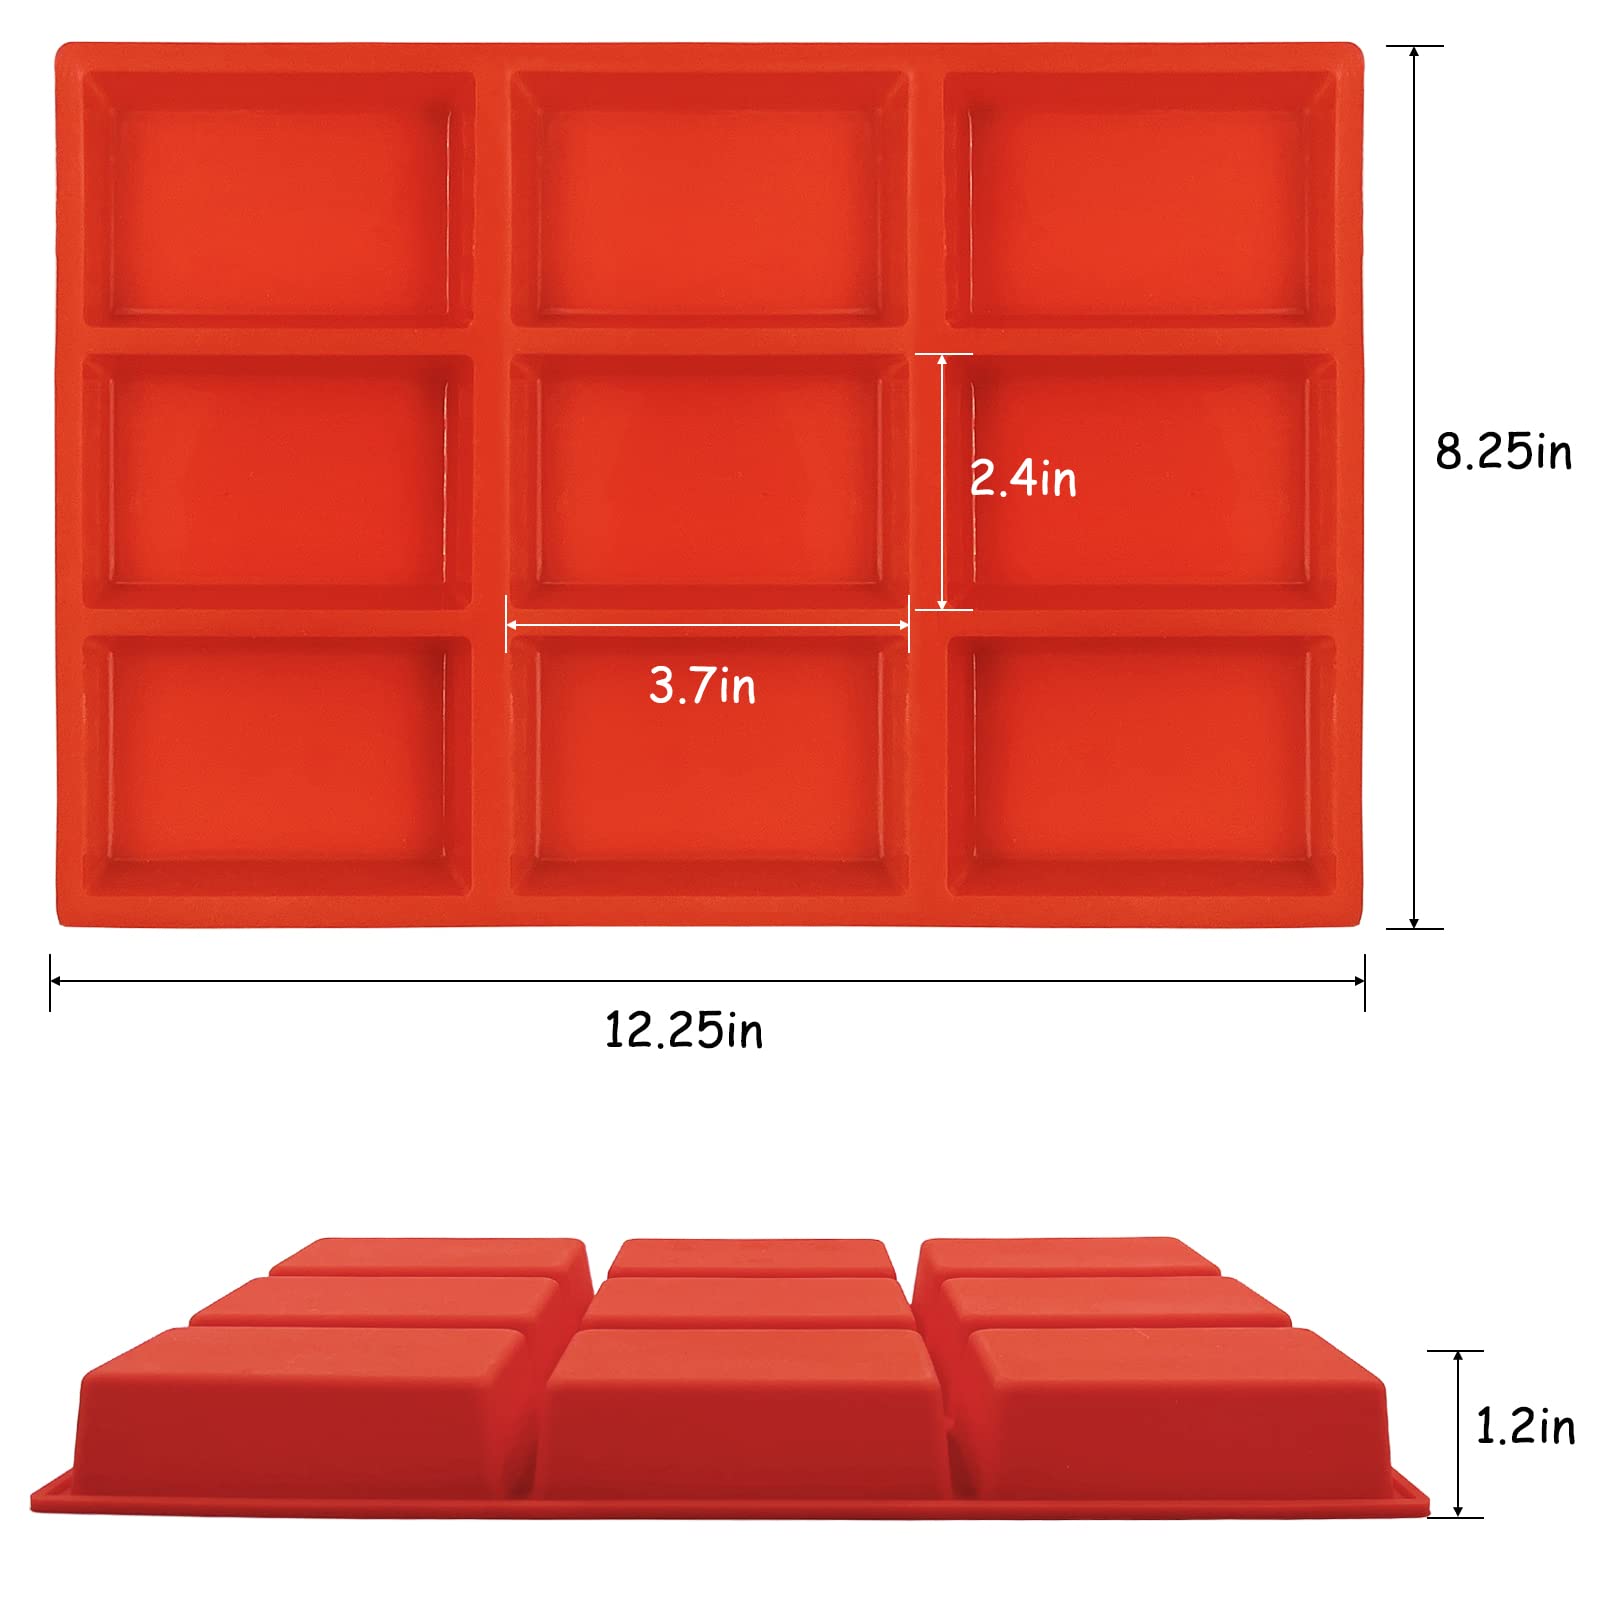 2 pcs 9 Cavities Silicone Bread Baking Mold, lyfLux Silicone Mini Cuboid Bread Plate, Suitable for Ice, Biscuits, Cakes, Jelly, Candy, Chocolate and So On.(Red and Purple)